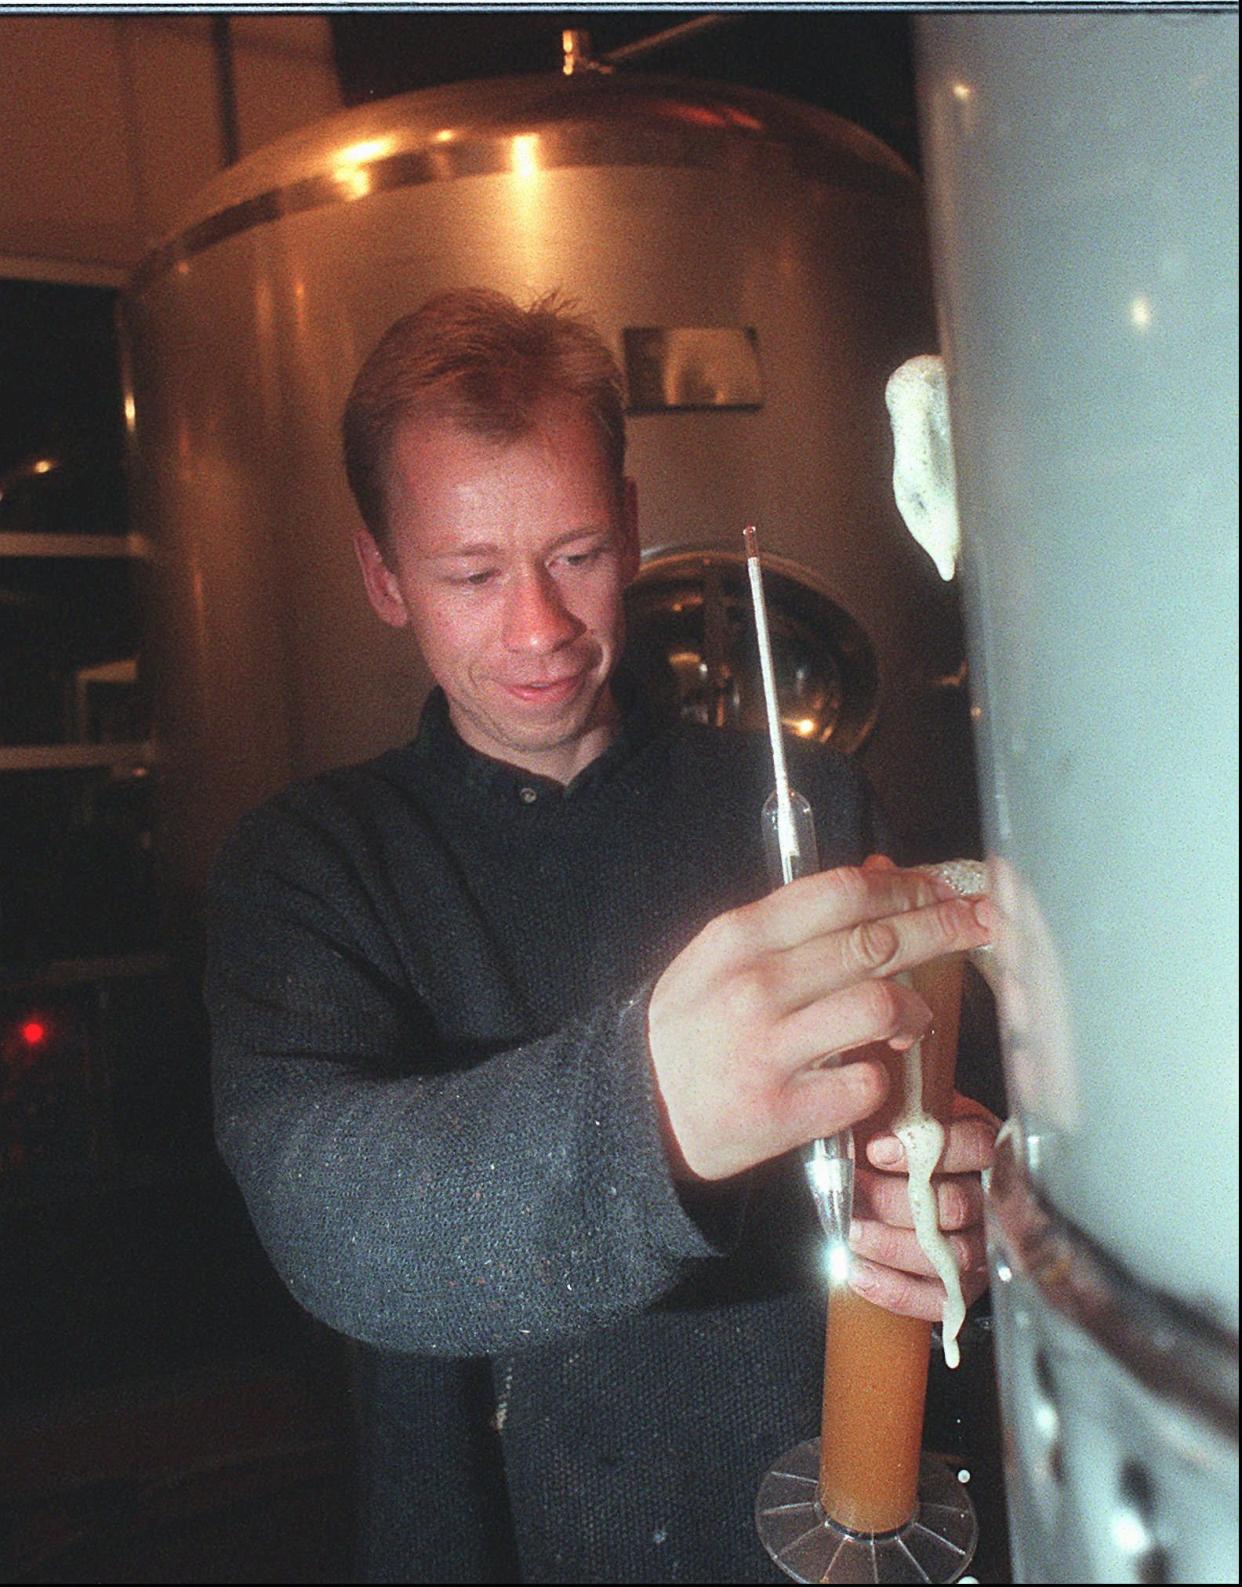 Brewmaster Dave Hartmann checks the gravity level in the Empire Brewing Company's Hefe-Weizen Yeast Wheat beer in the brewing room in January 1997.